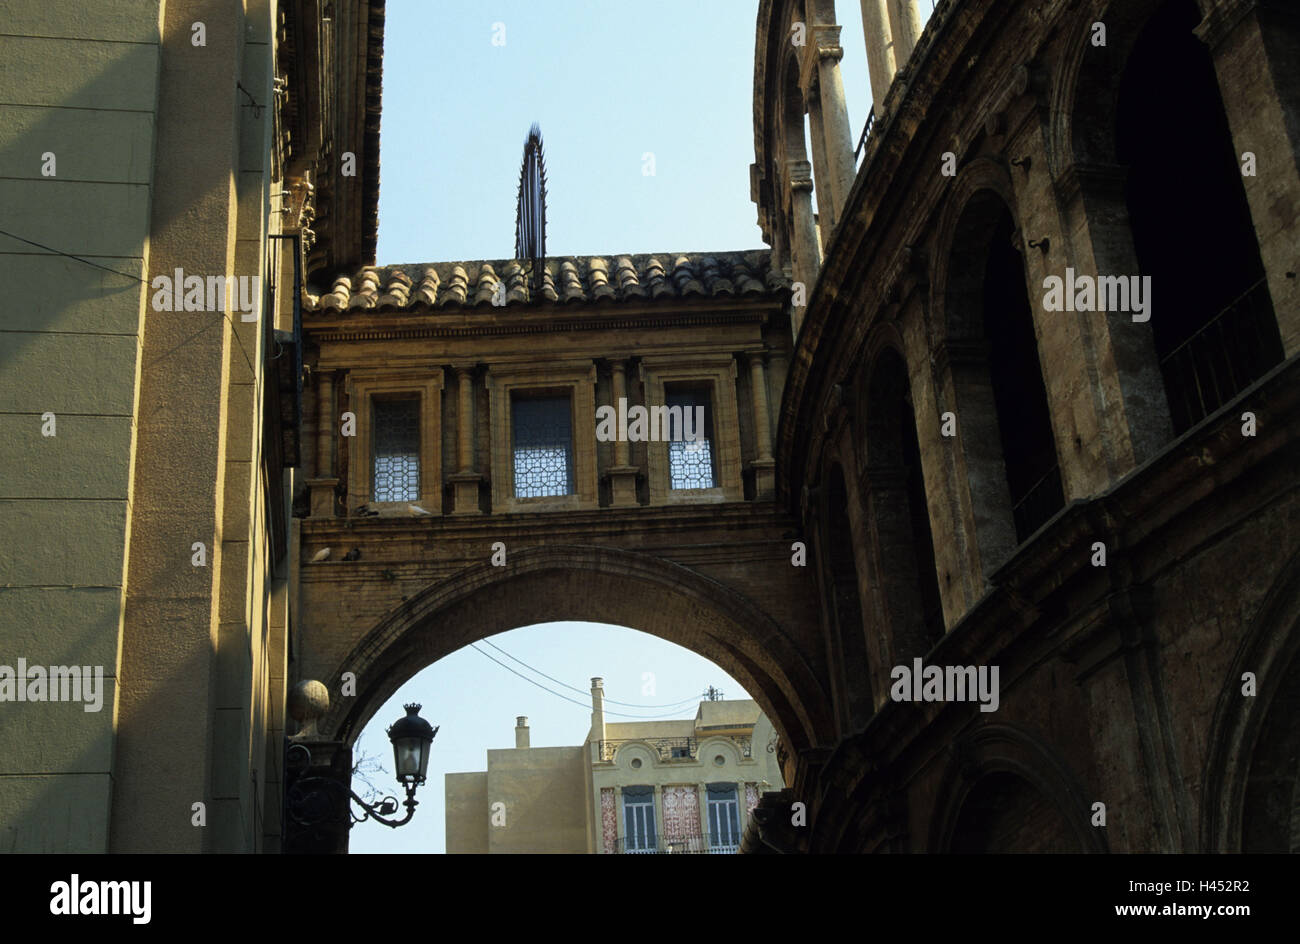 Spain, Valencia, old part of town, buildings, connection, archway, walk, from below, Valencia-Stadt, city center, houses, round-bow, connection-walk, windows, construction, architecture, historically, sight, destination, tourism, Stock Photo